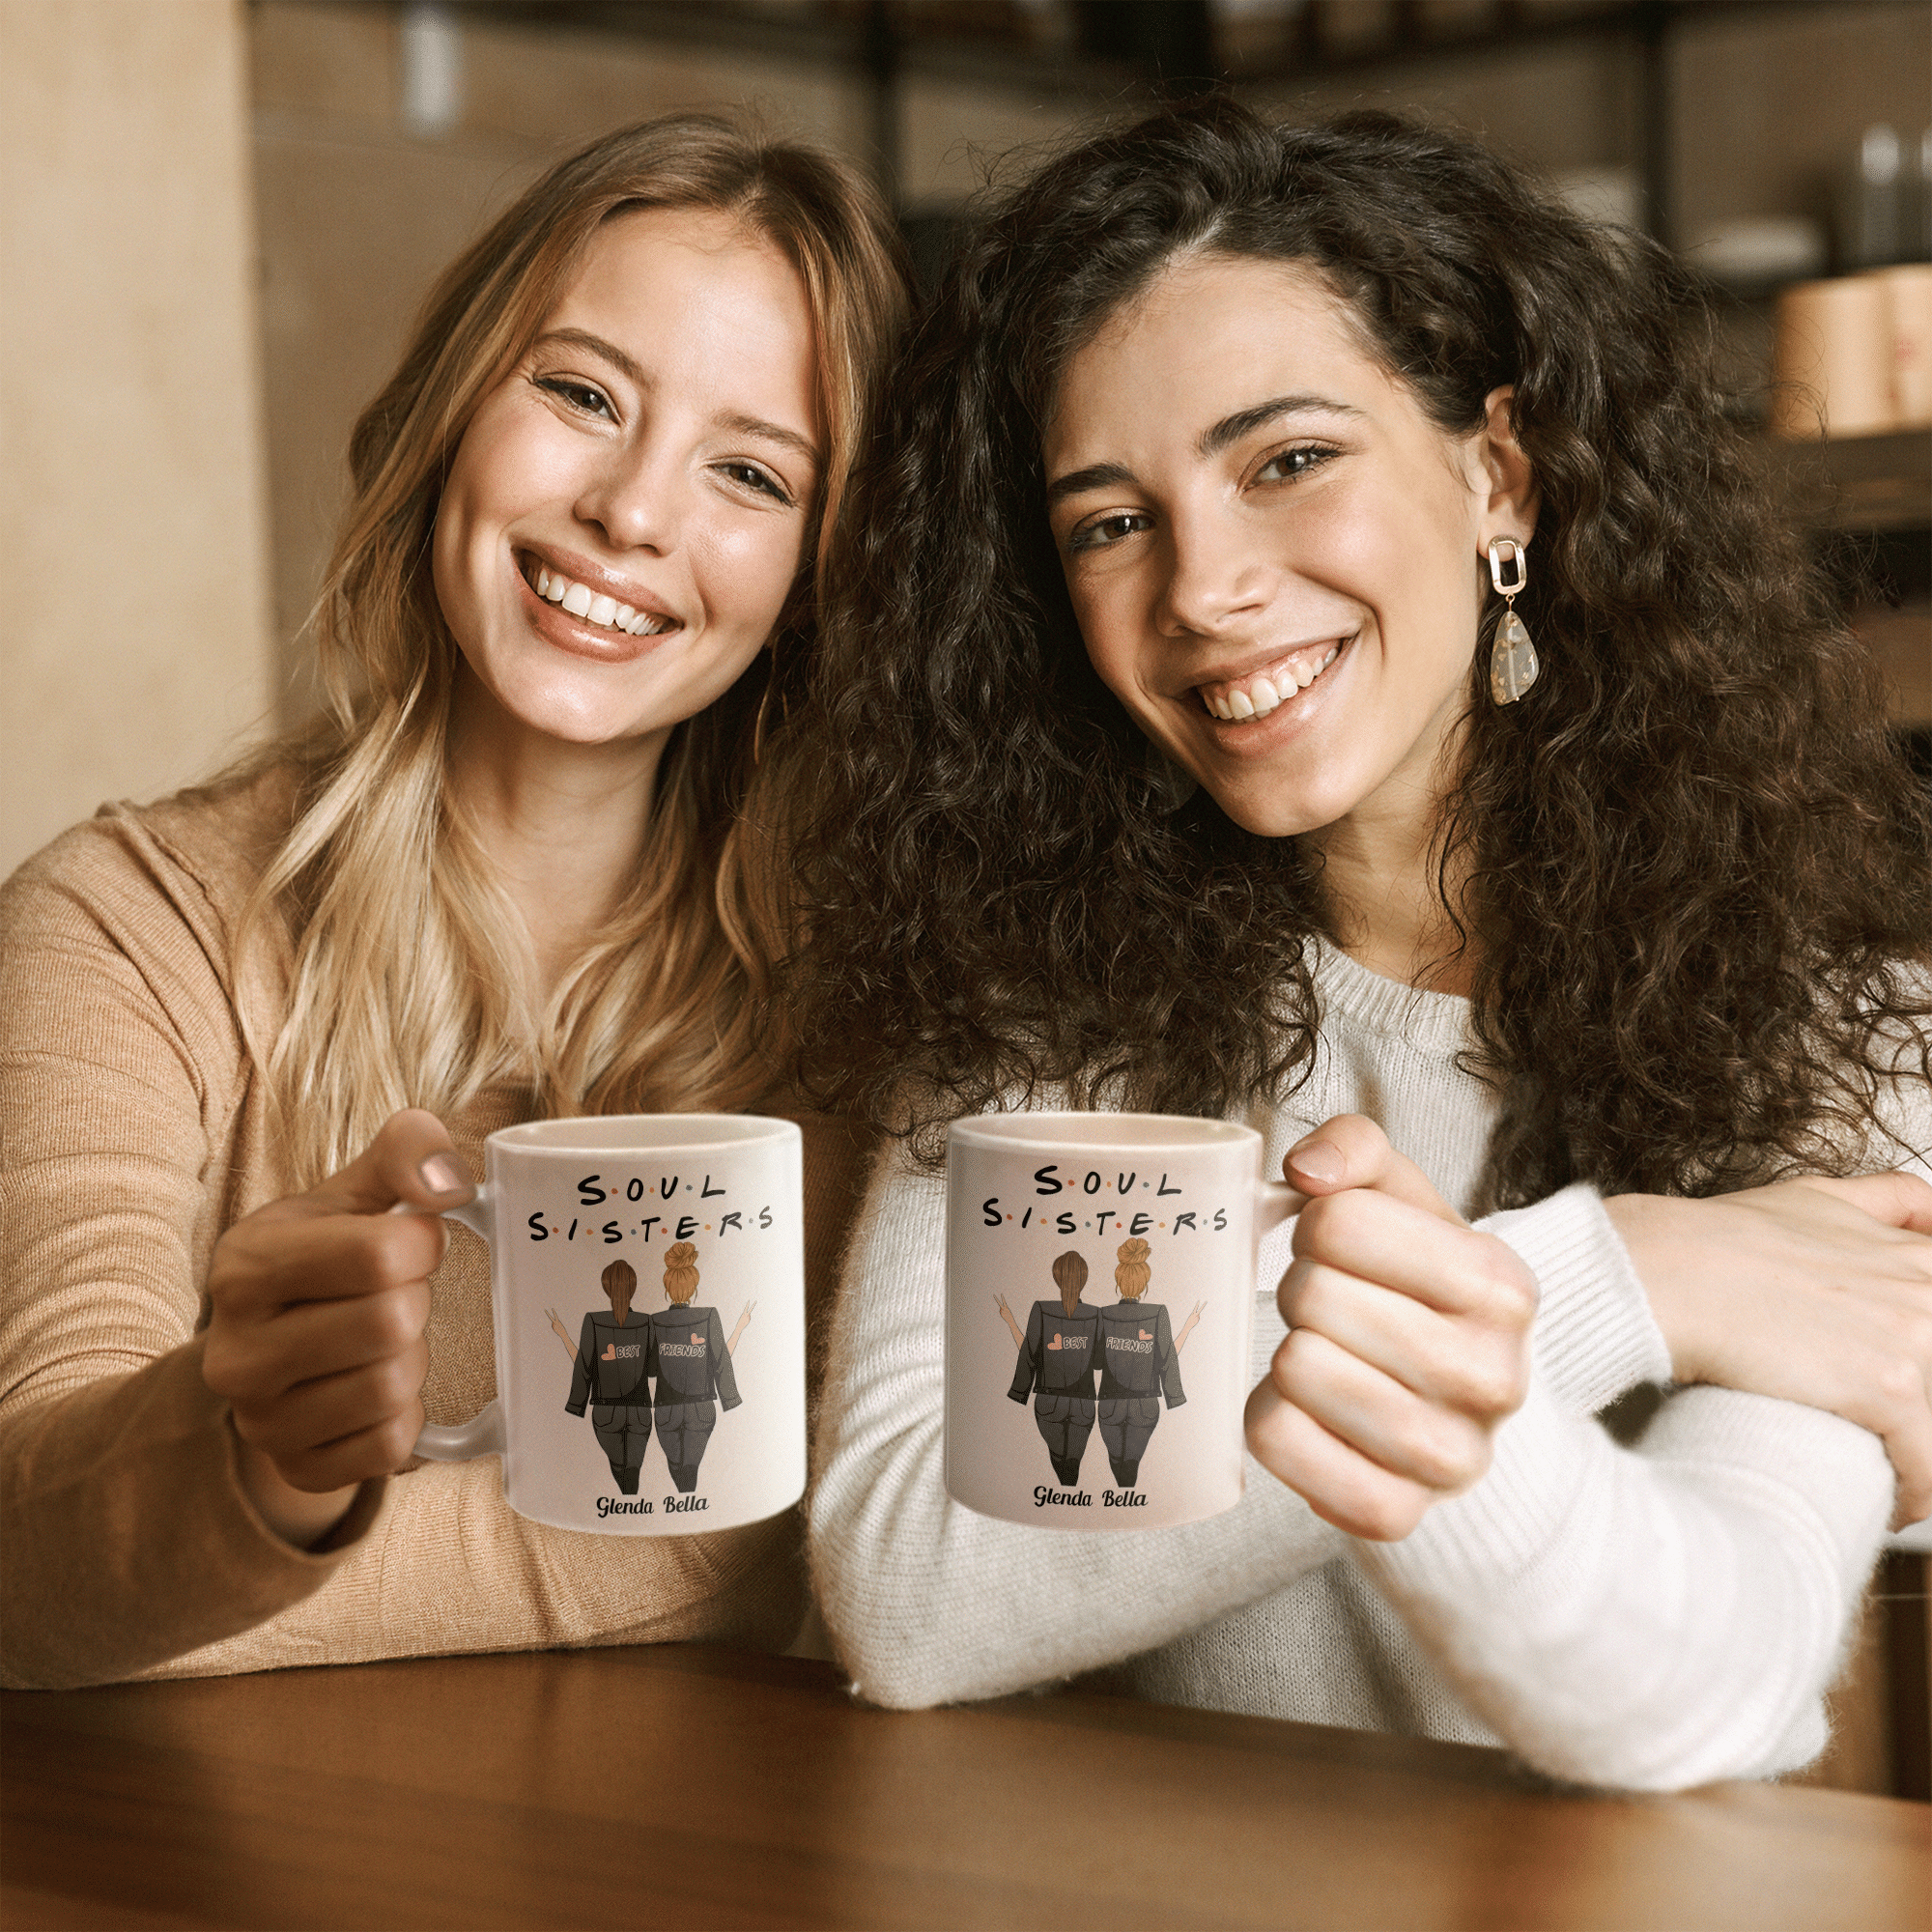 Soul Sisters Ver 2 - Personalized Mug - Birthday, Christmas Gift For Sister, Soul Sister, Best Friend, BFF, Bestie, Friend - Standing Girls Illustration